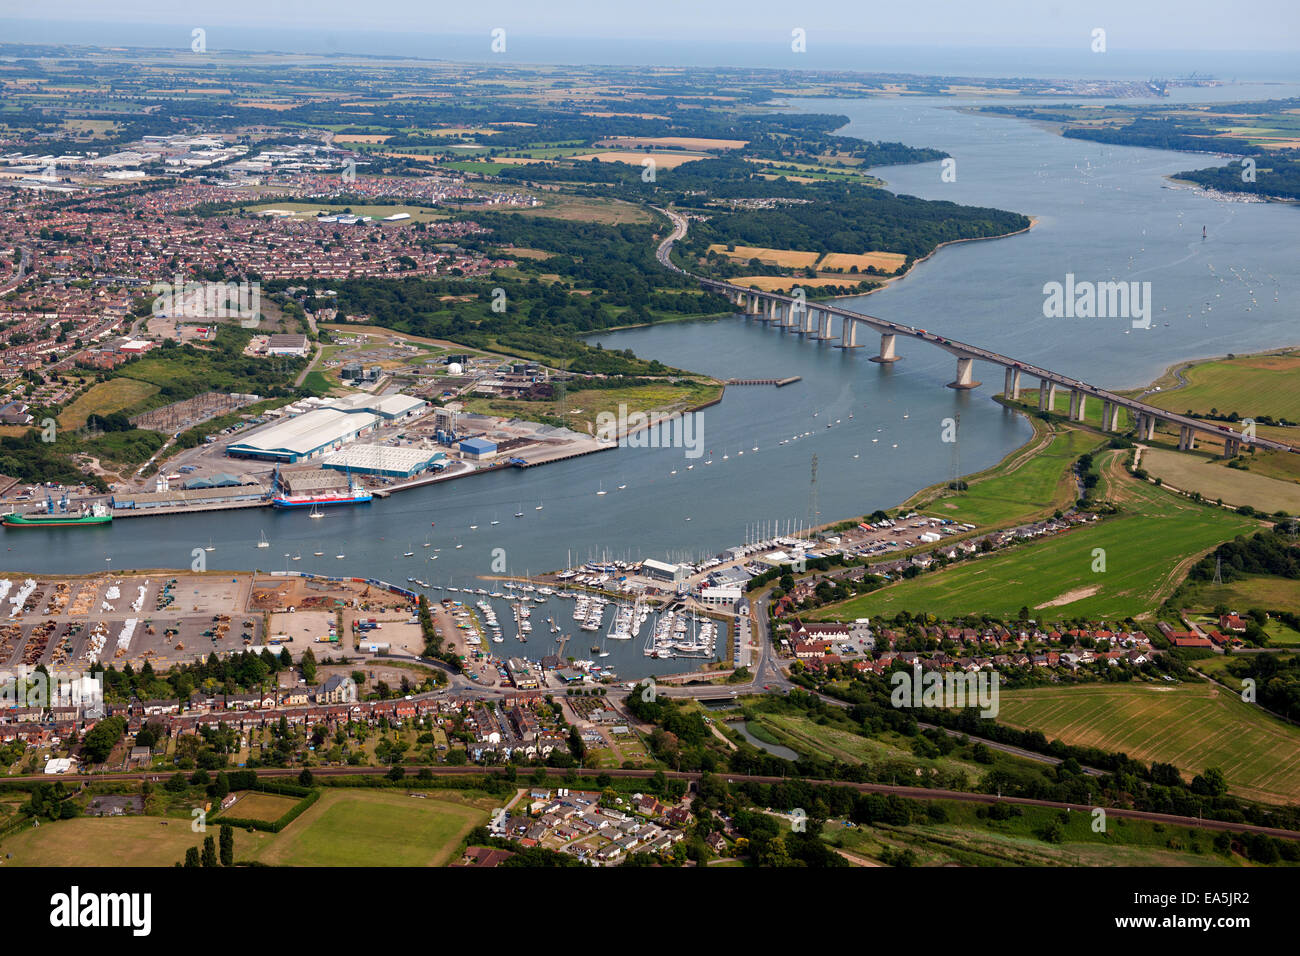 An aerial view of Ipswich Suffolk with the town centre, Football stadium offices and the marina on the River Orwell Stock Photo